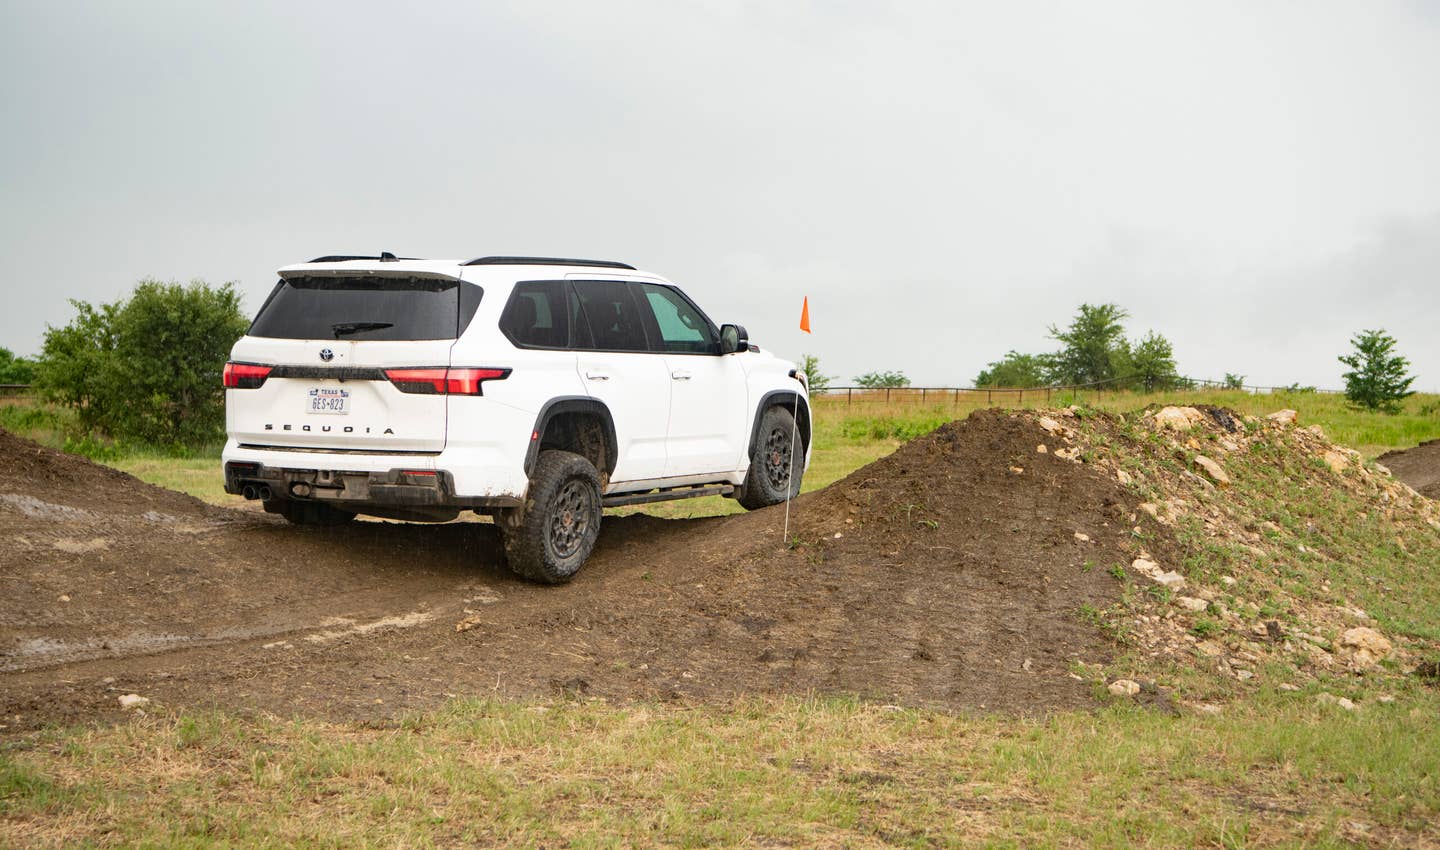 Toyota Sequoia on an off-road course, demonstrating how the truck handles changing camber.